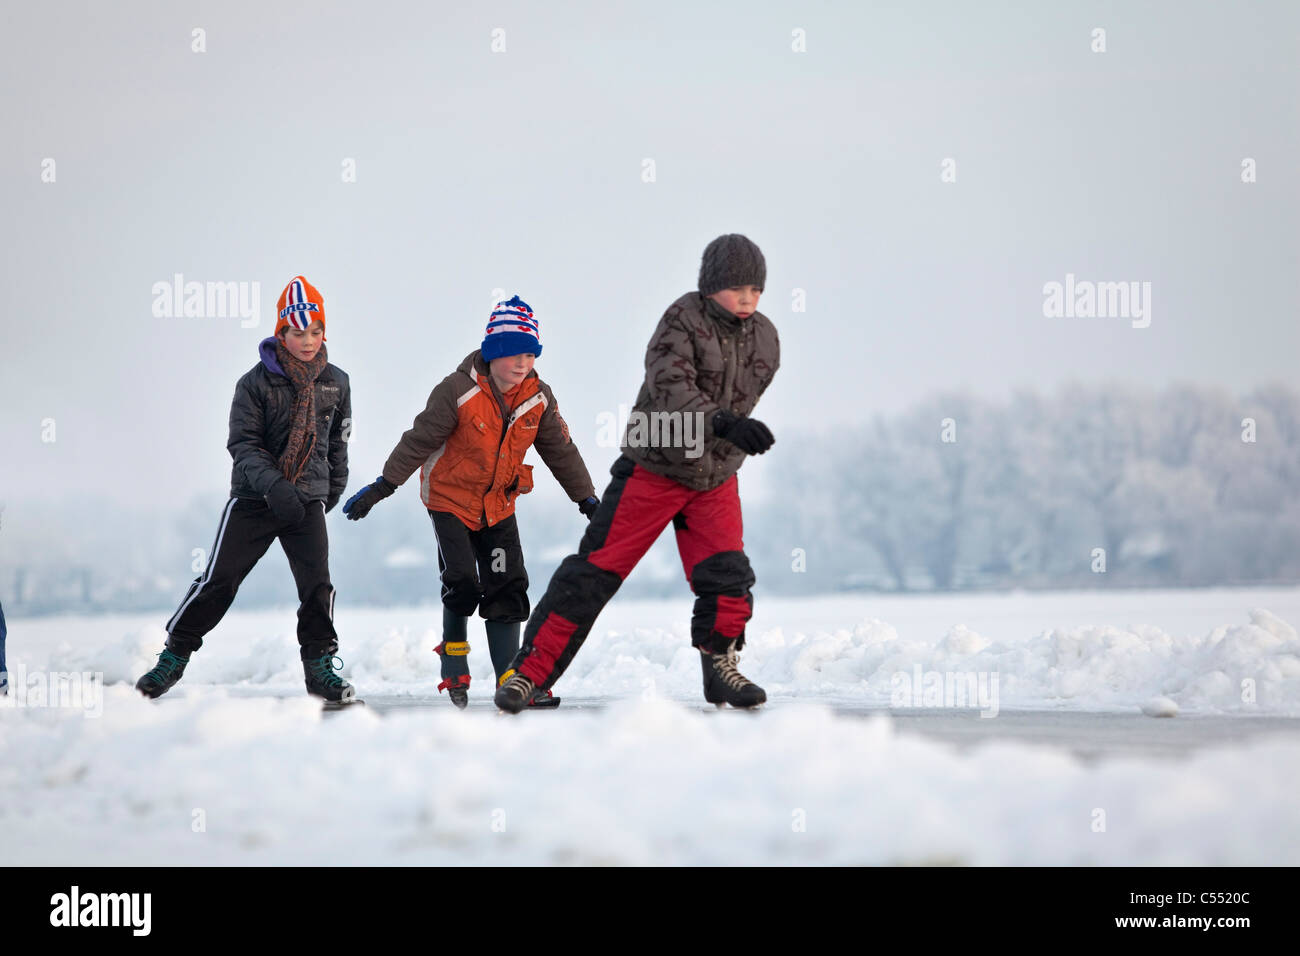 The Netherlands, Gaastmeer, Skating on frozen lake in frost and snow landscape. Stock Photo